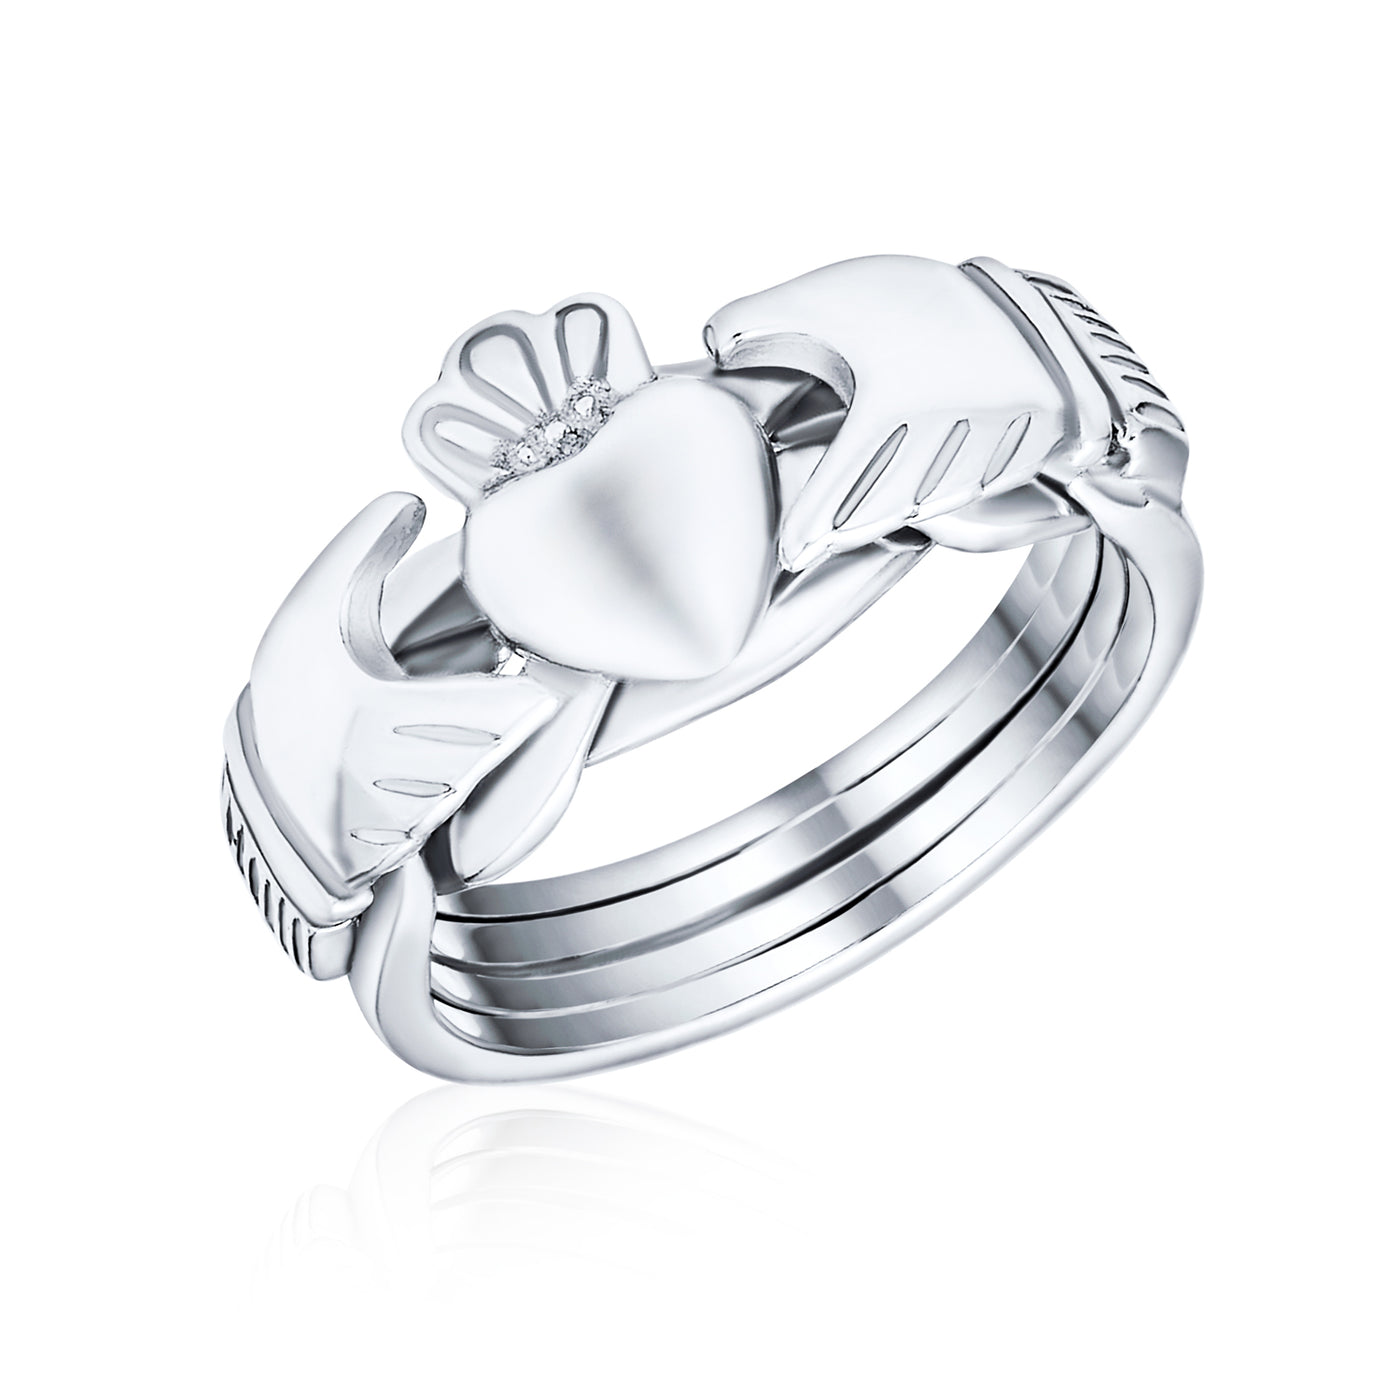 Celtic Trinity Hands Crown Claddagh Puzzle Ring .925 Sterling Silver